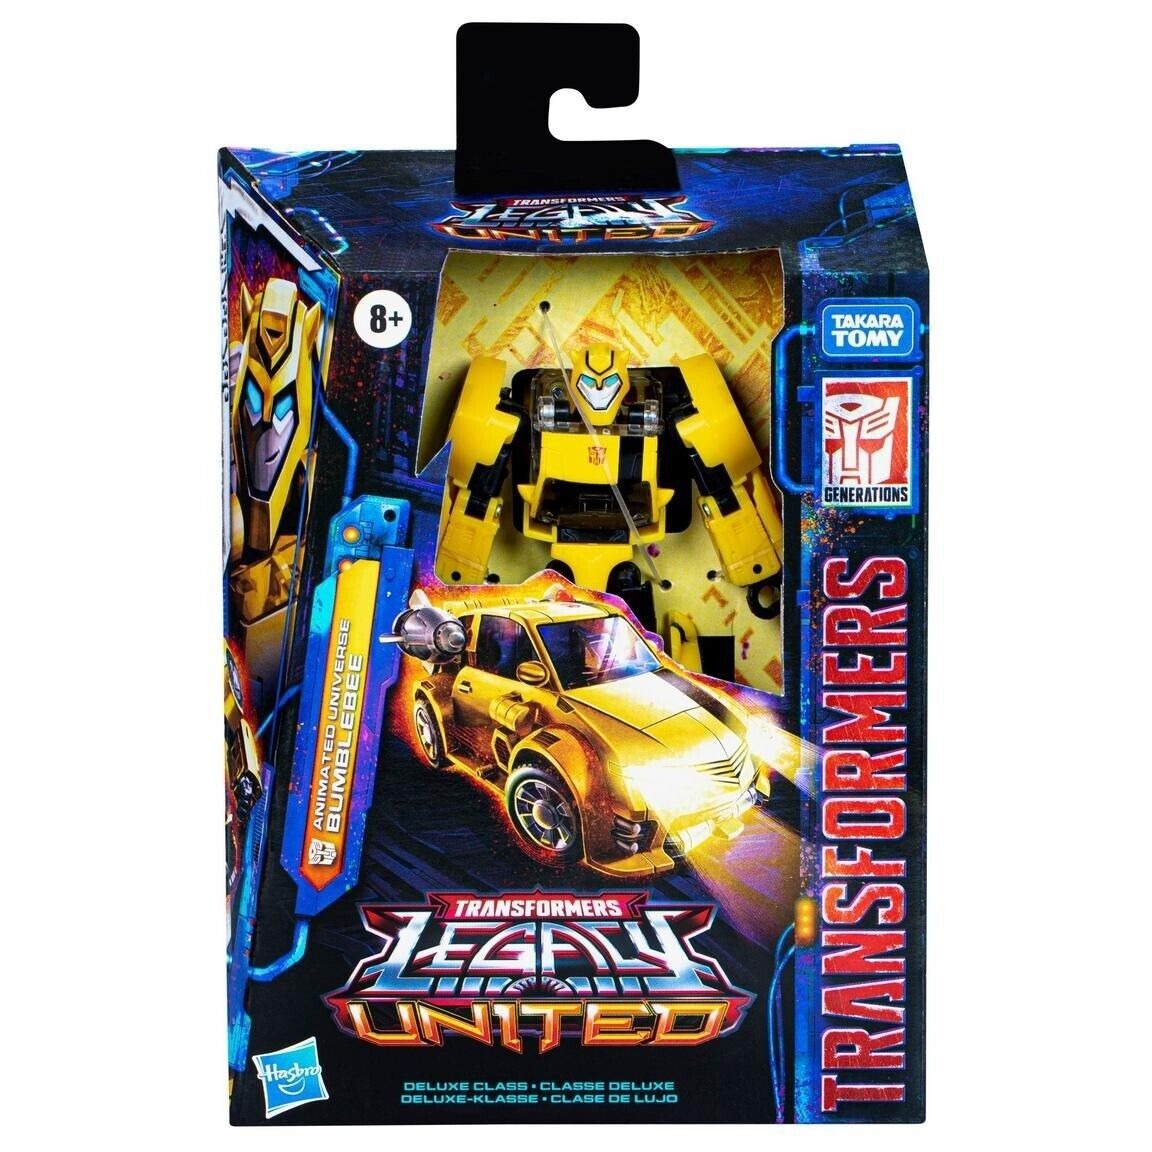 Transformers Legacy United Deluxe Class Animated Universe Bumblebee Figure